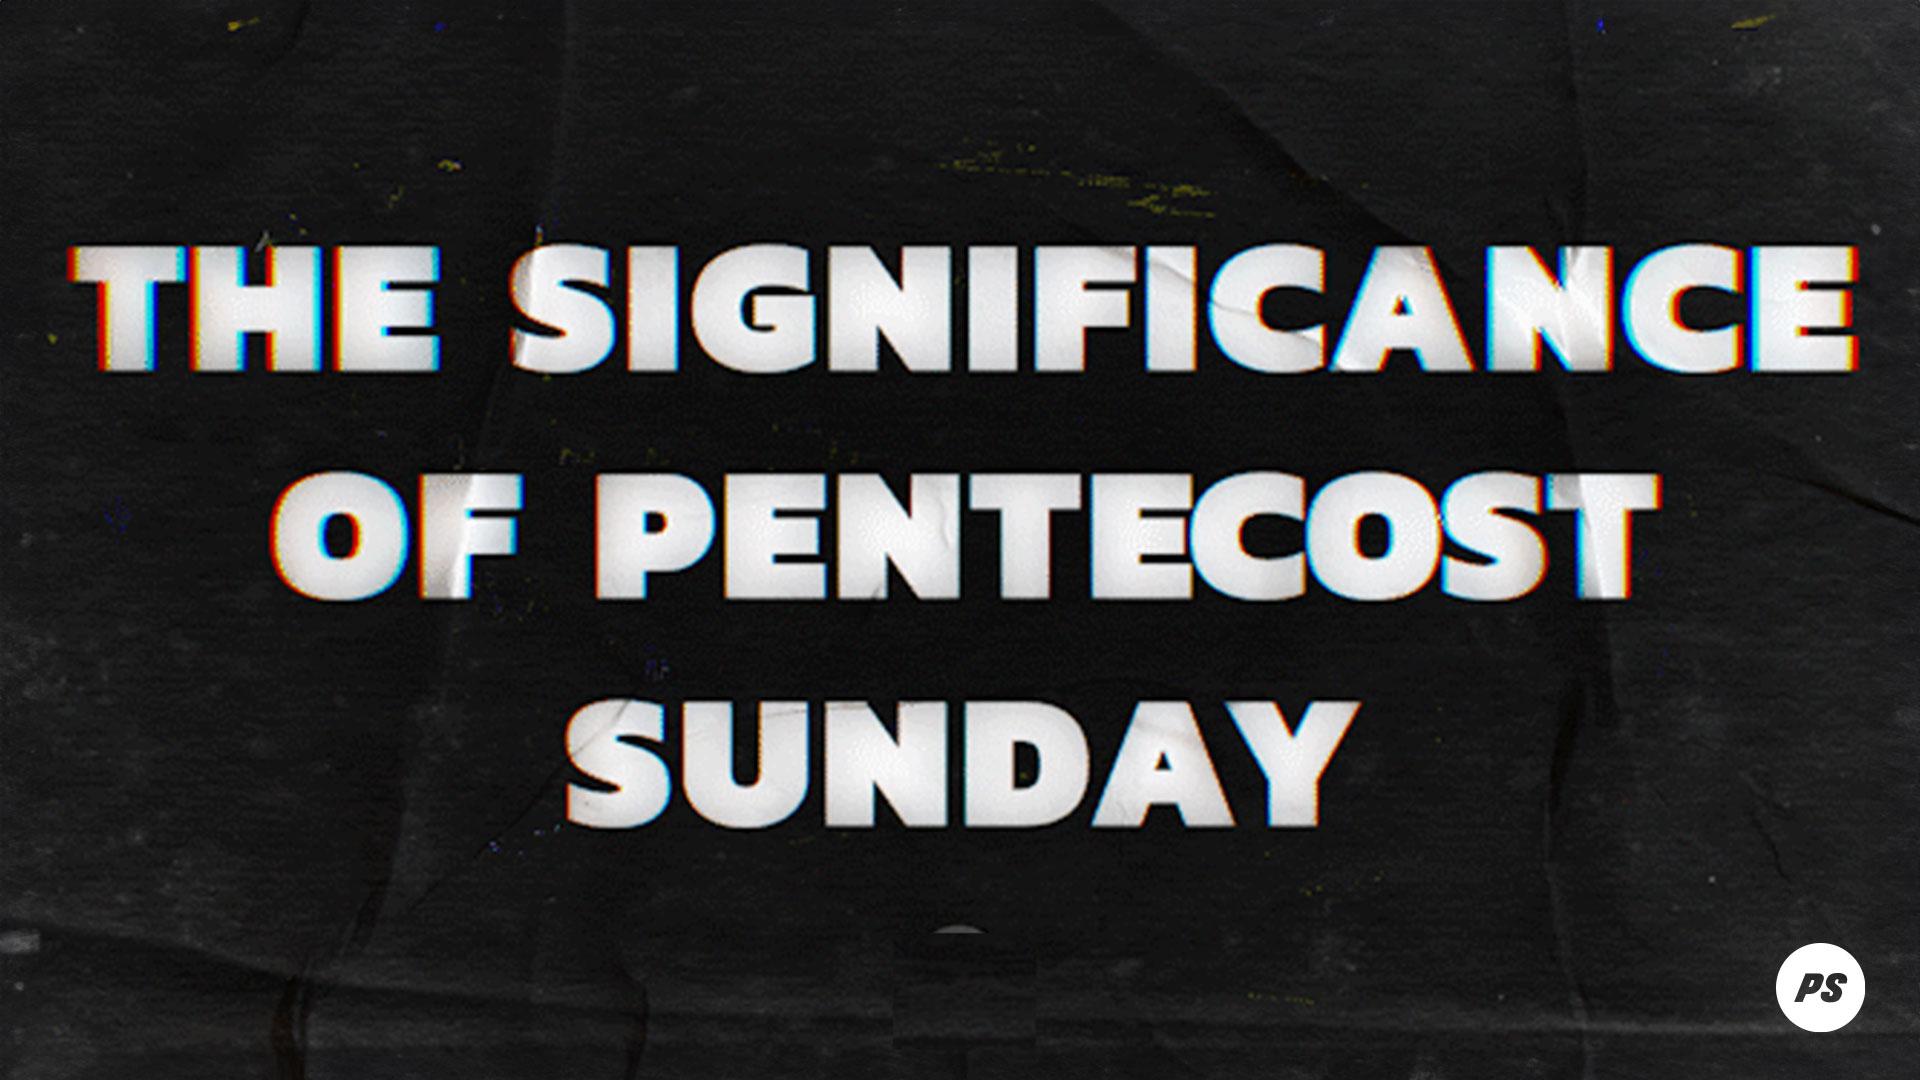 Featured Image for “The Significance of Pentecost Sunday”